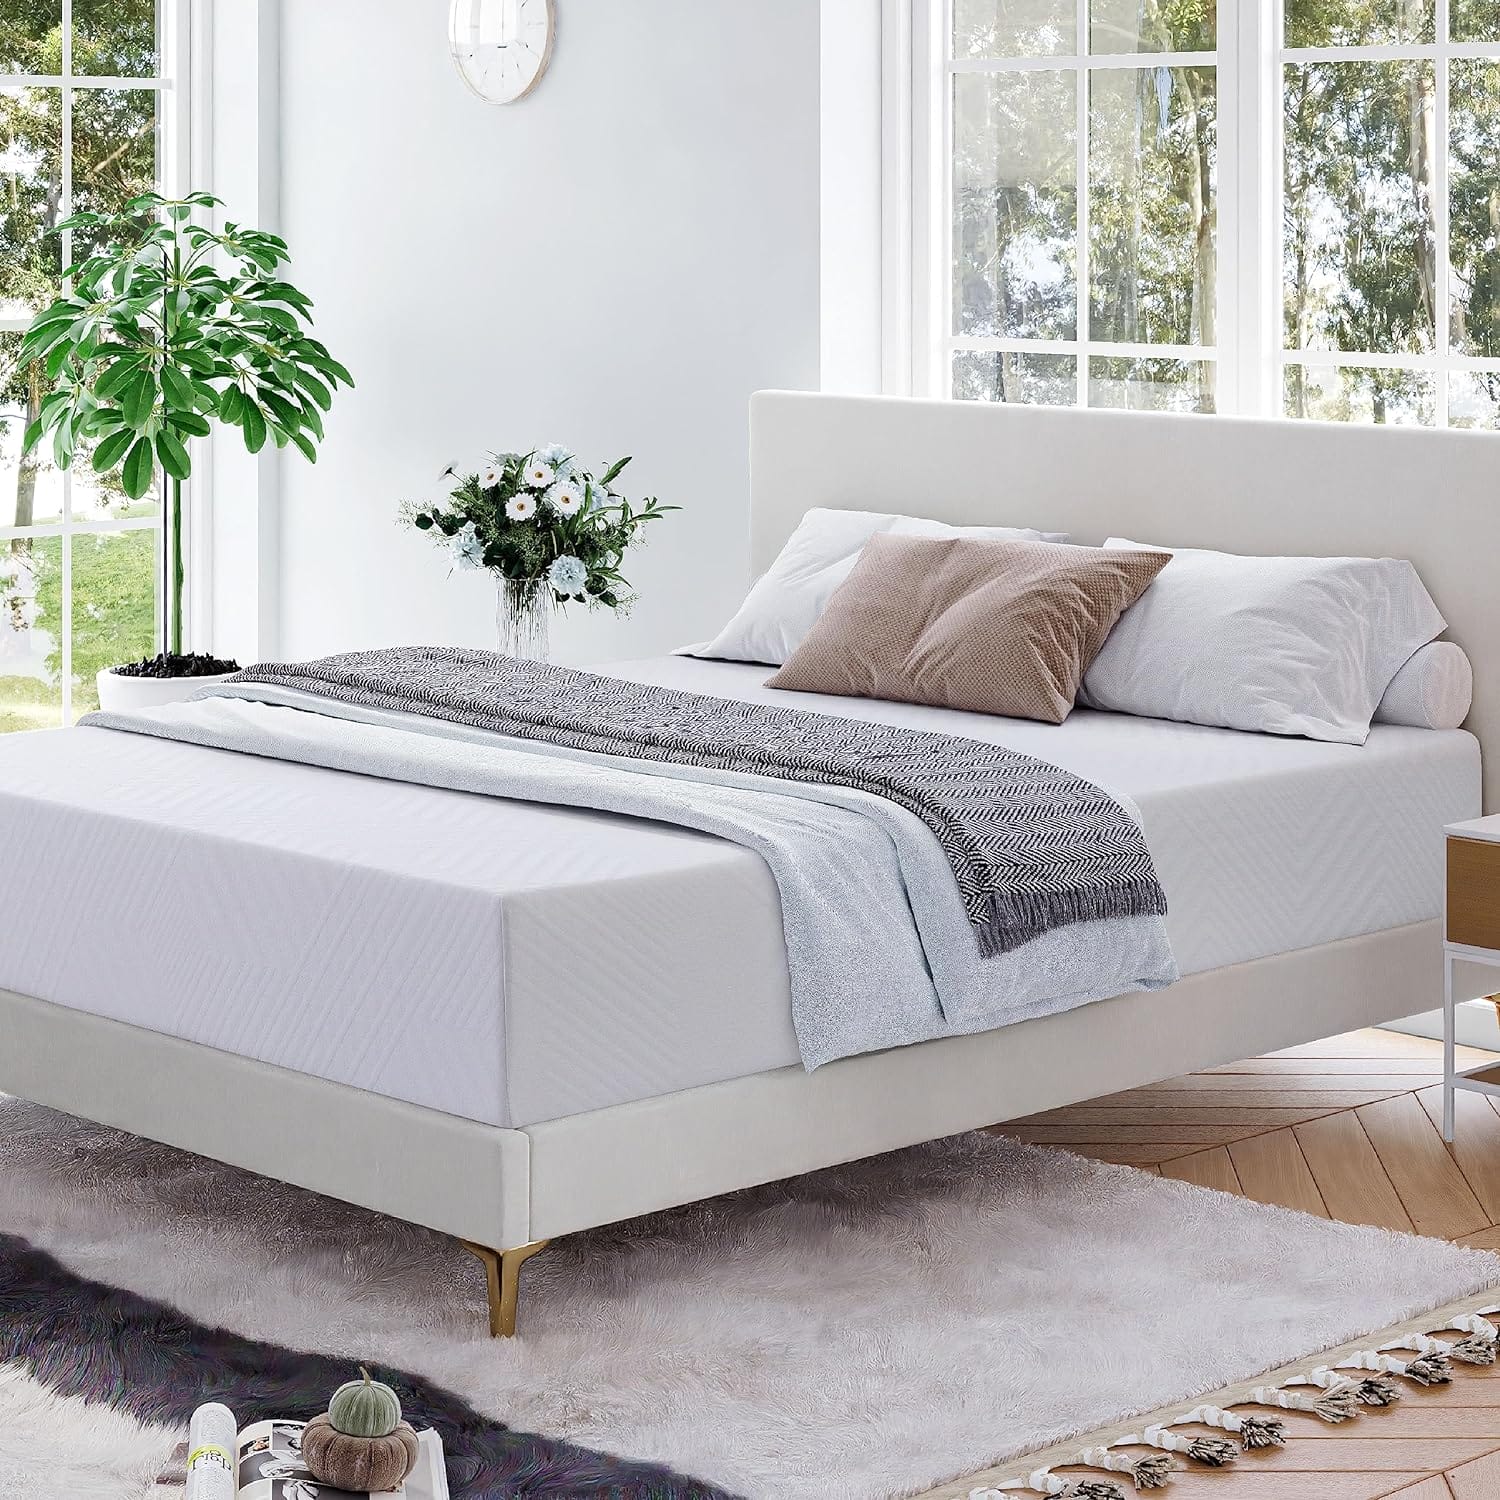 Dyonery Mattress Review: Comfort, Quality, Safety